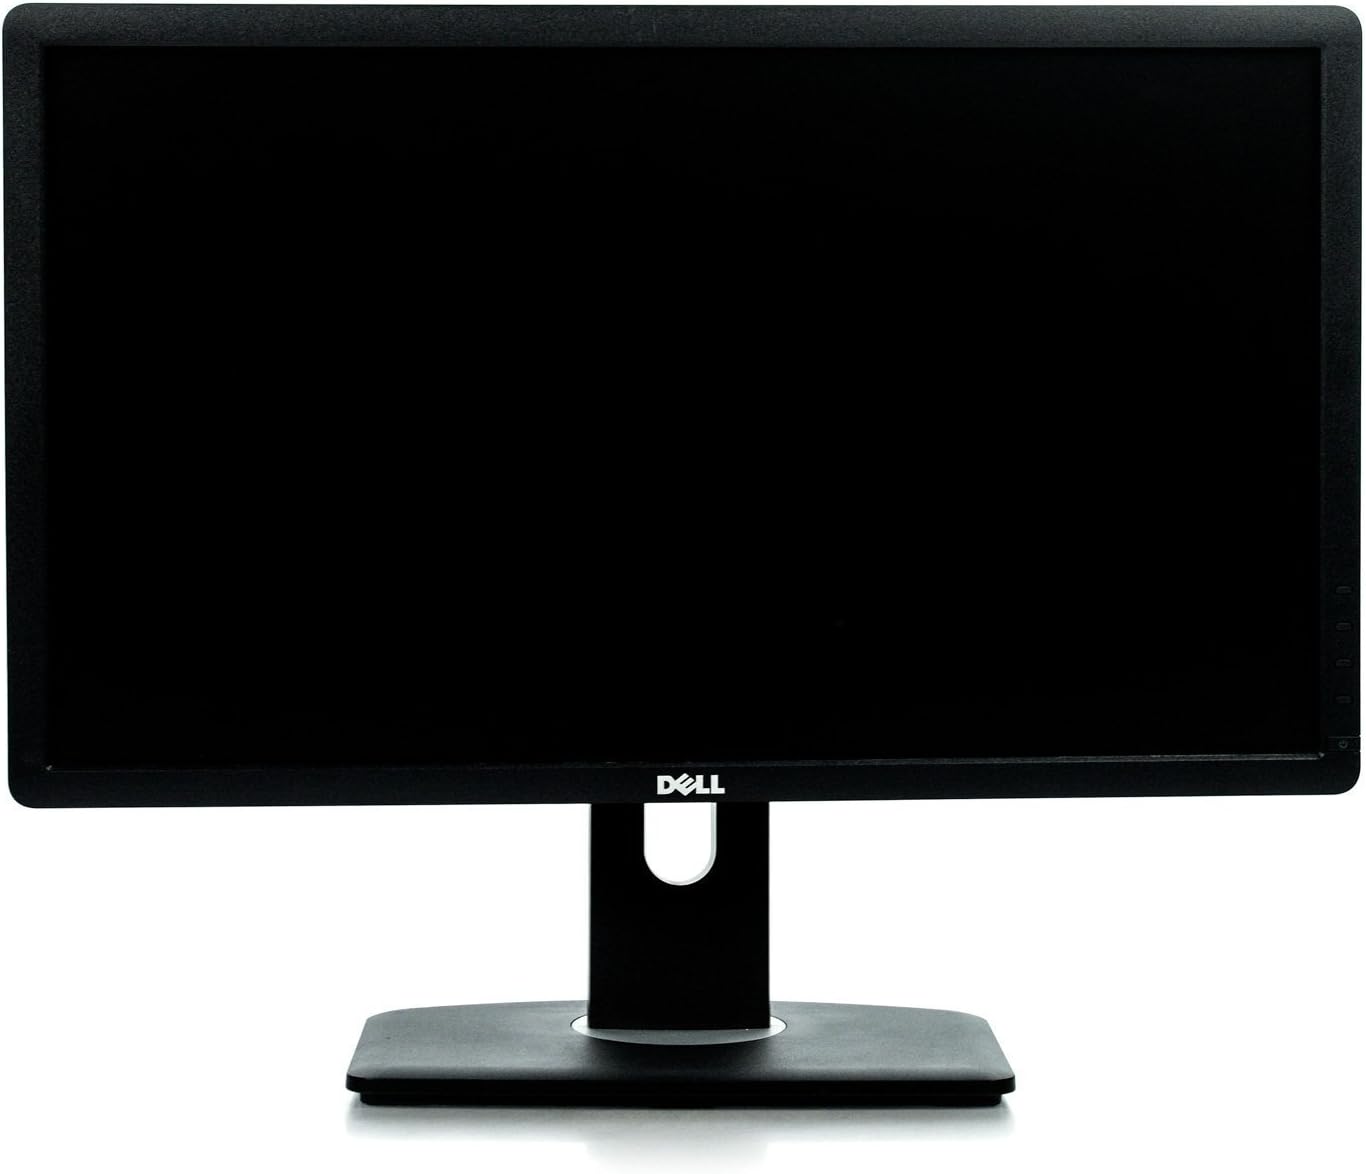 Dell P2312HT 23.0" Adjustable Full HD Monitor with VGA & DVI Connectivity